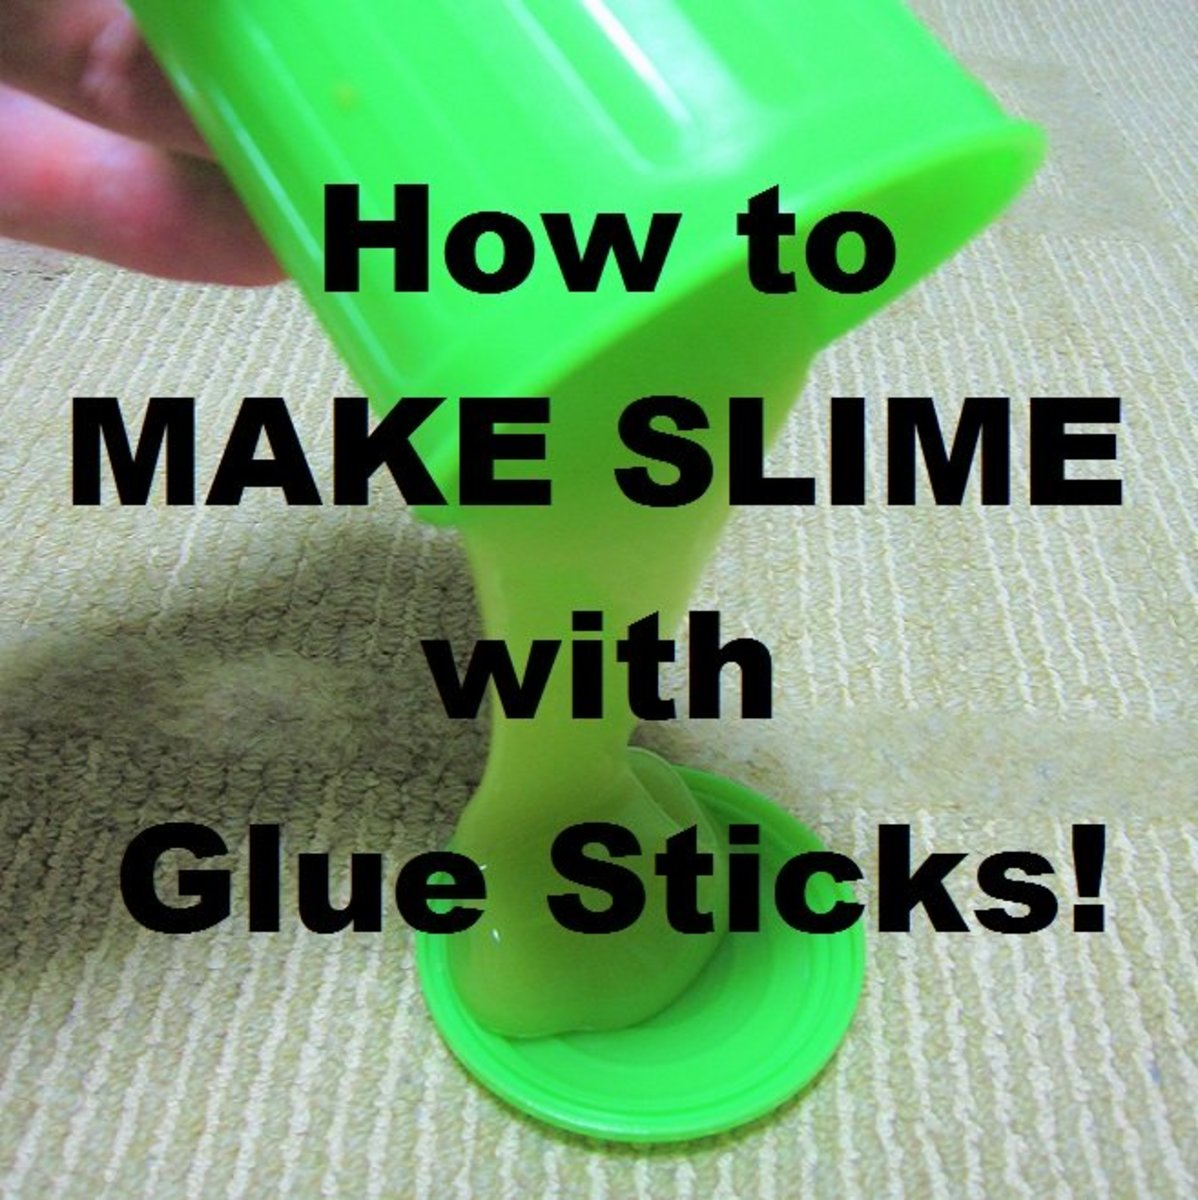 3 Ways to Make Your Slime Bigger Without Adding Glue - wikiHow